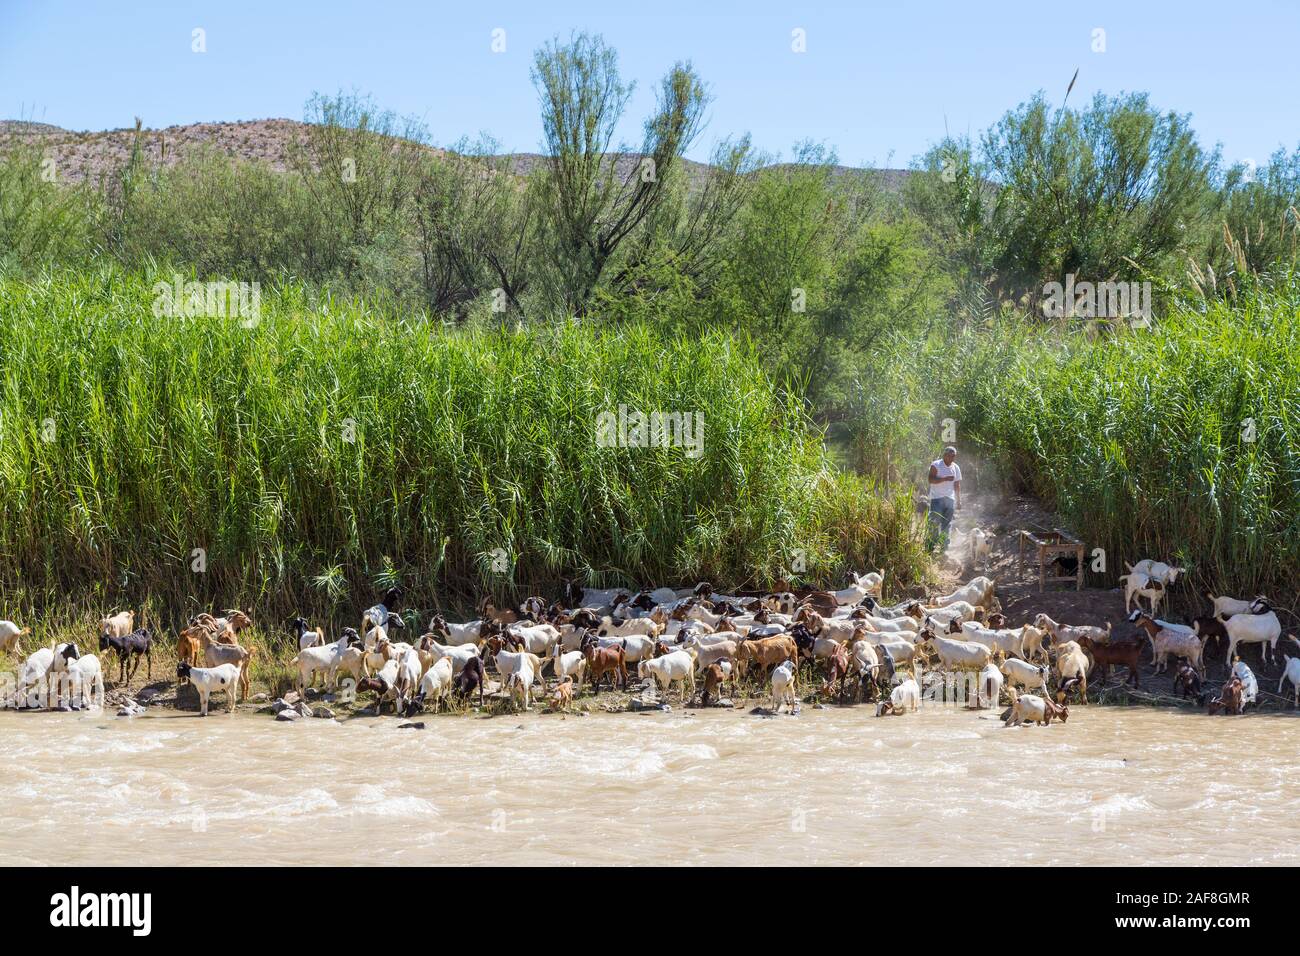 Big Bend National Park, Rio Grande River. Mexican Herdsman Bringing his Goats to the River to Drink.  River Bank Covered with Carrizo Cane (Giant Re Stock Photo